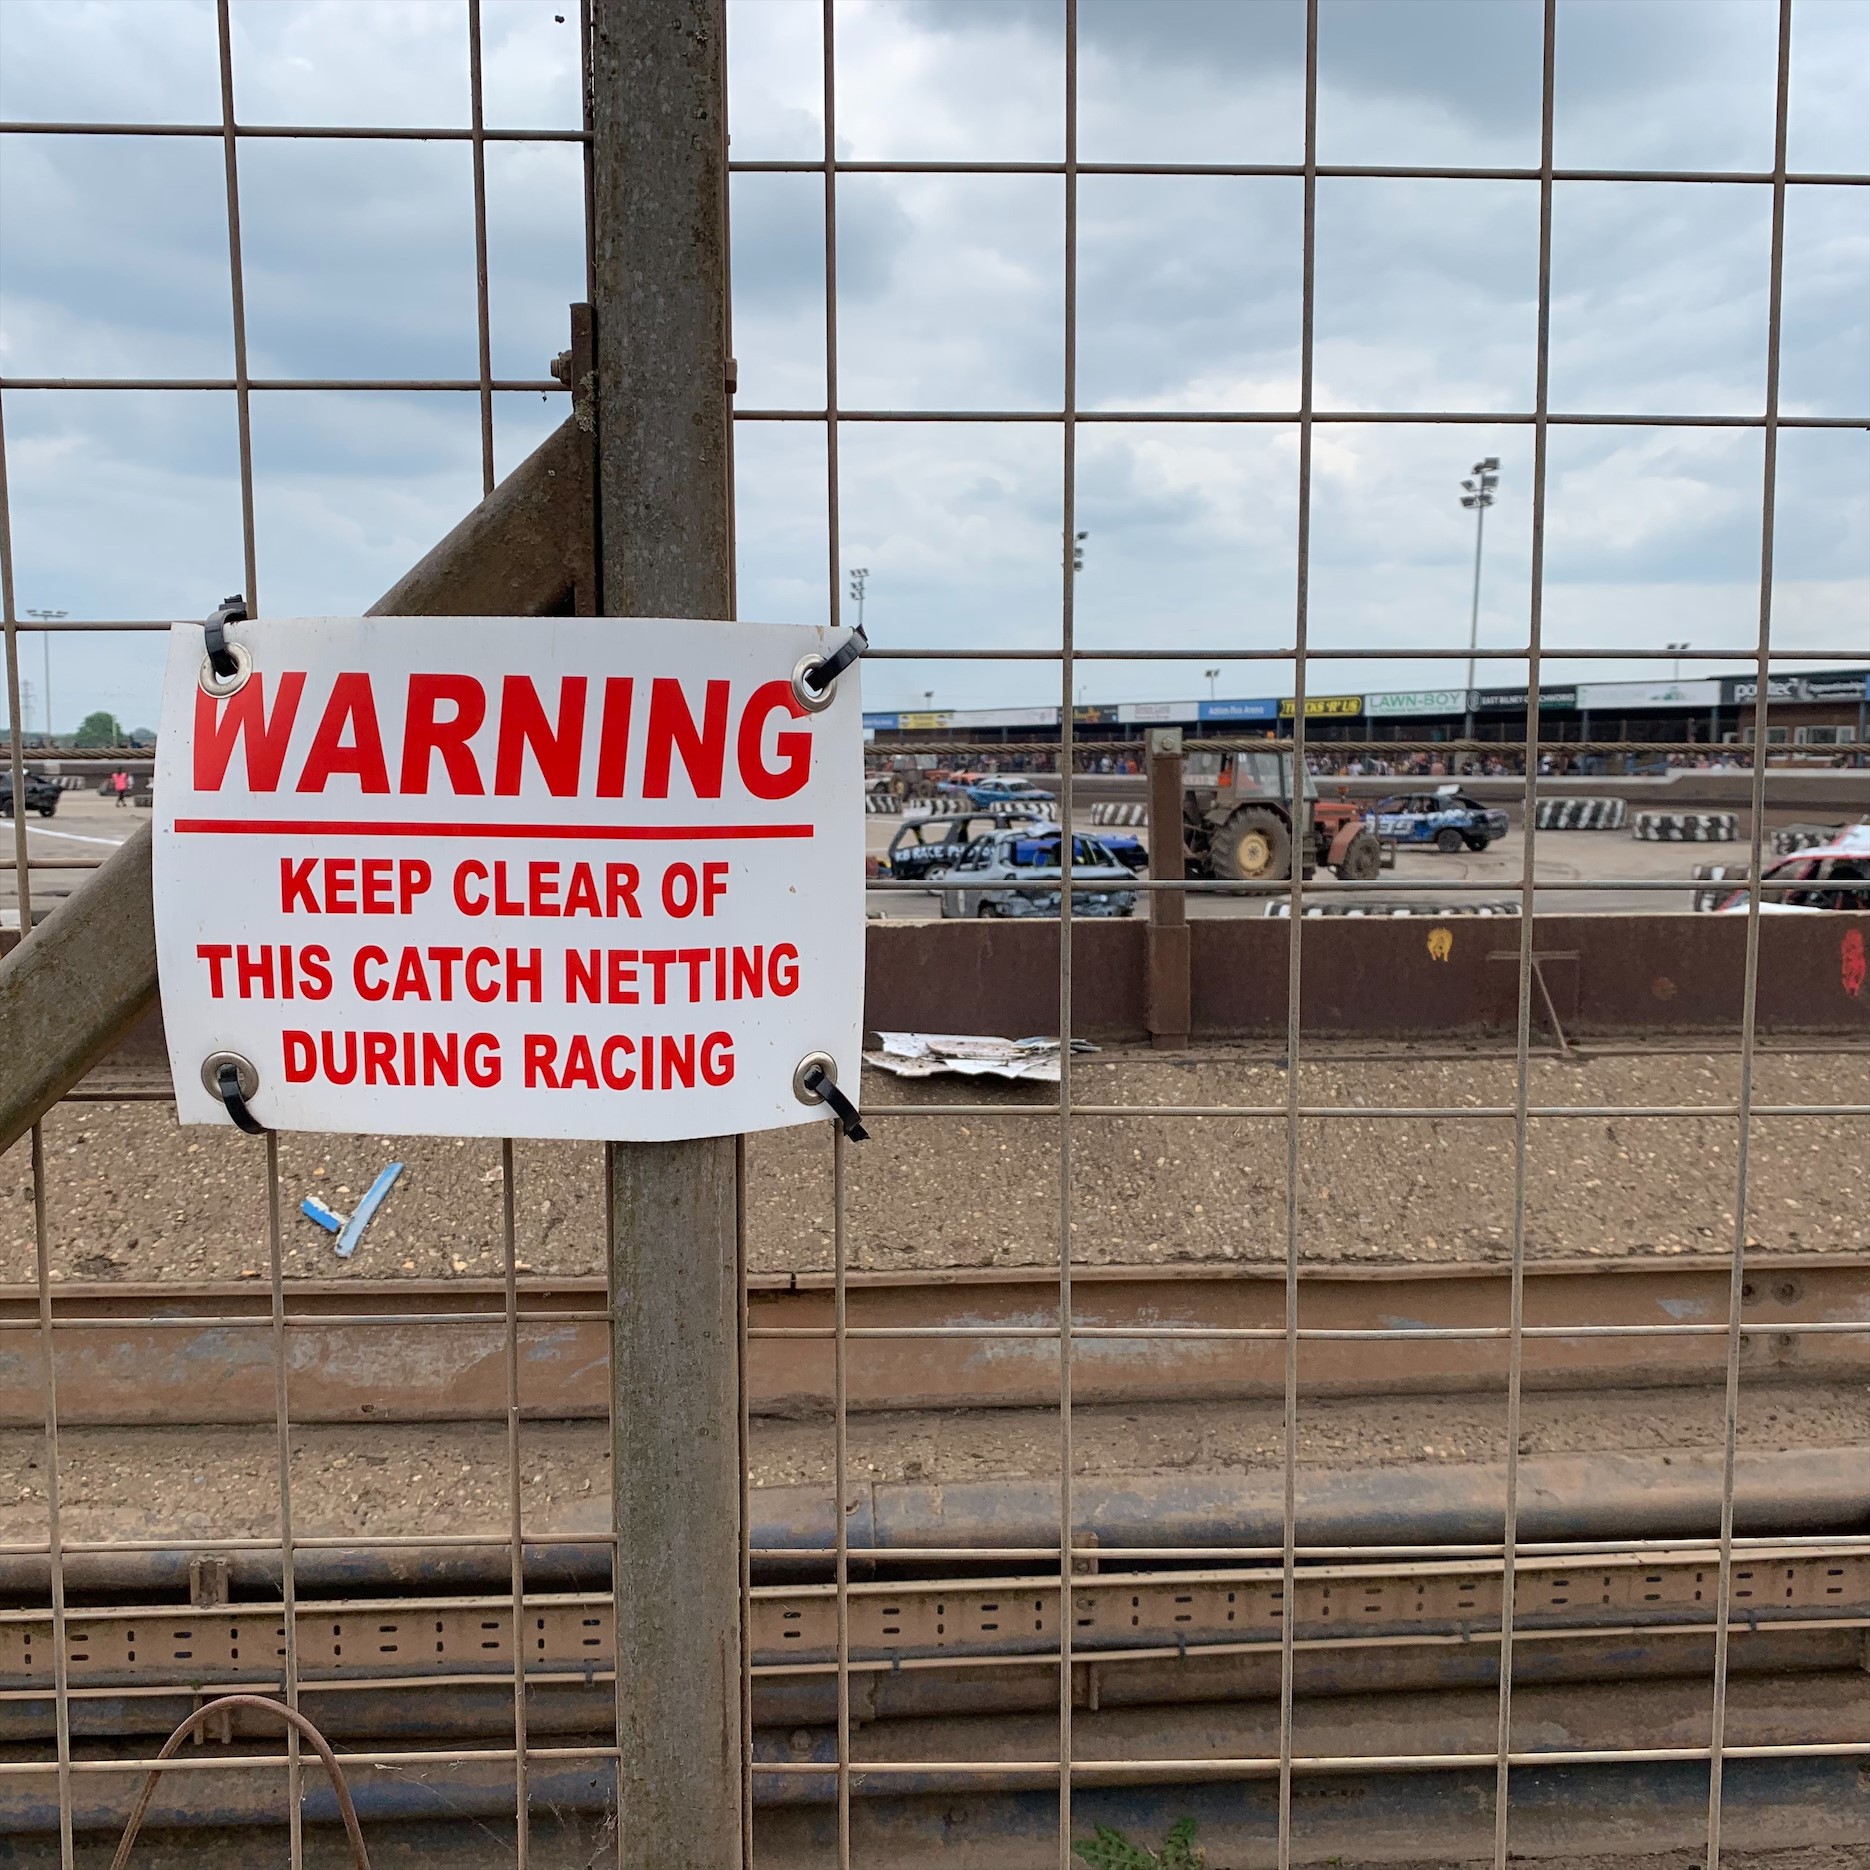 How safe is banger racing?